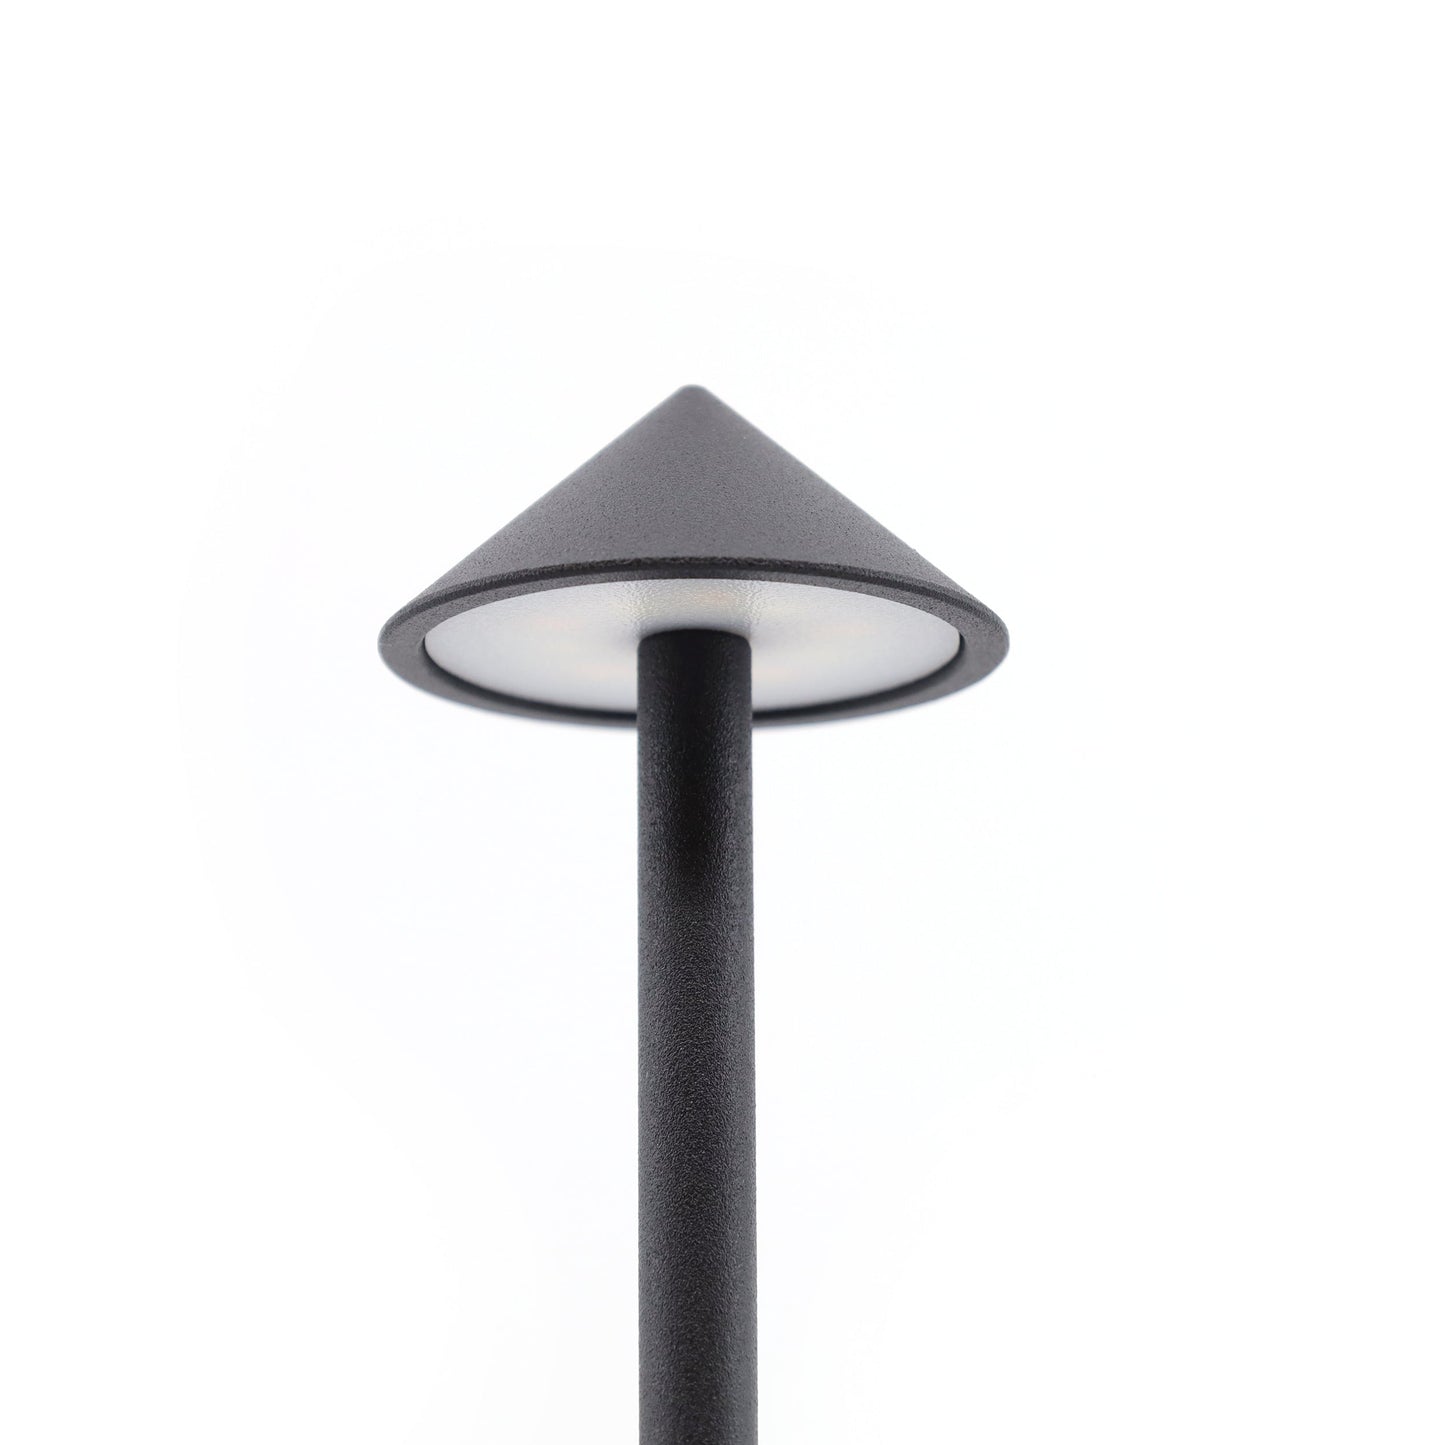 NEXARA Shade Crest Rechargeable Table Lamp Black